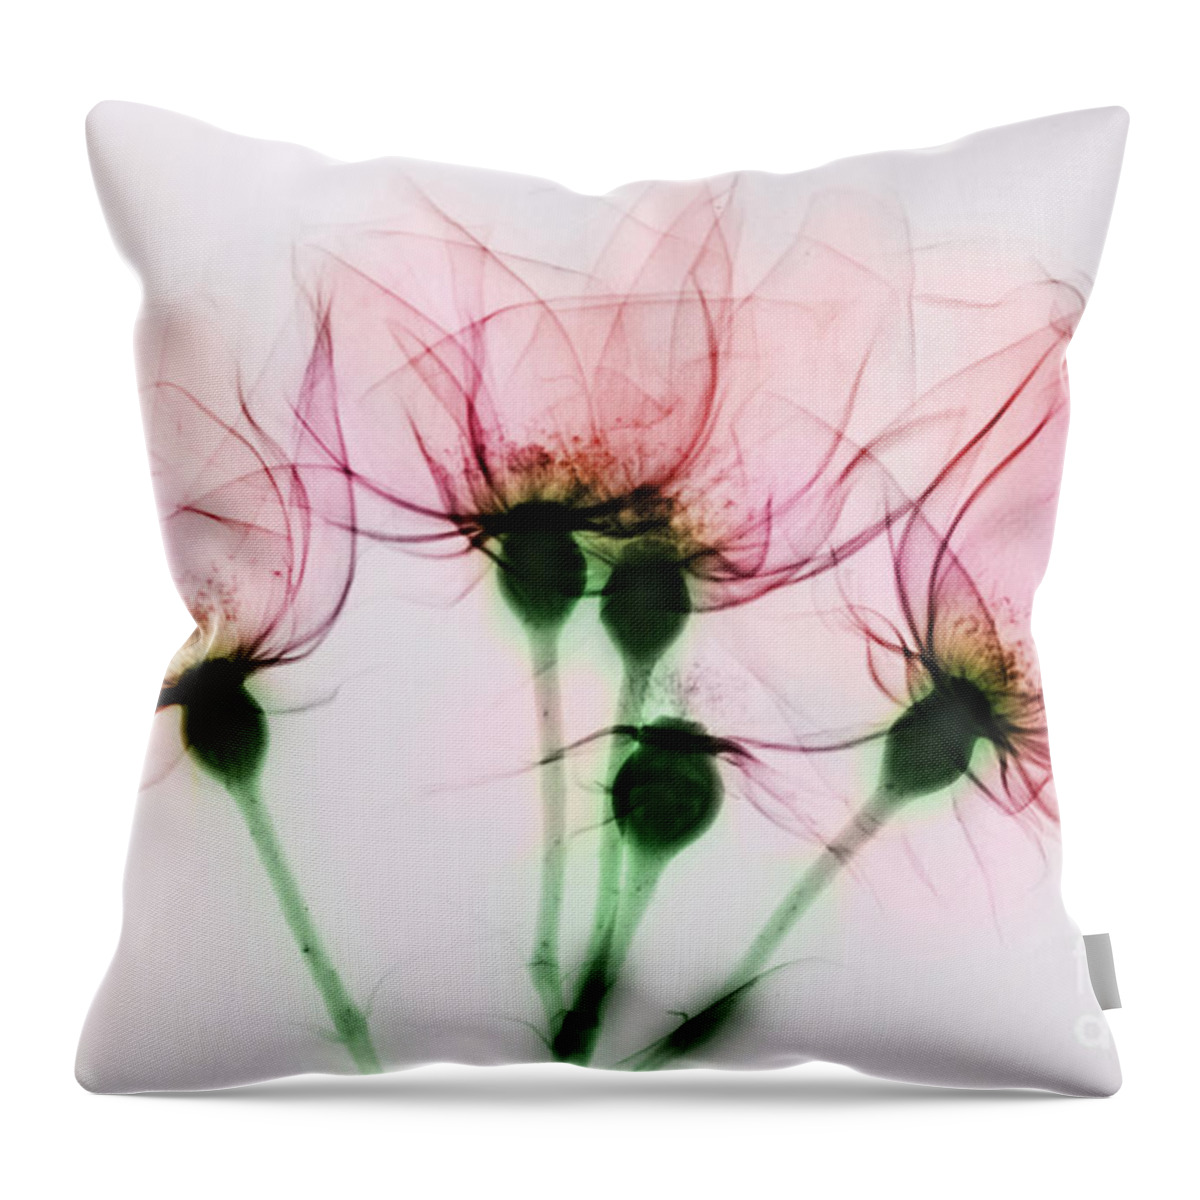 Rose Throw Pillow featuring the photograph Colorized X-ray Of Roses by Scott Camazine